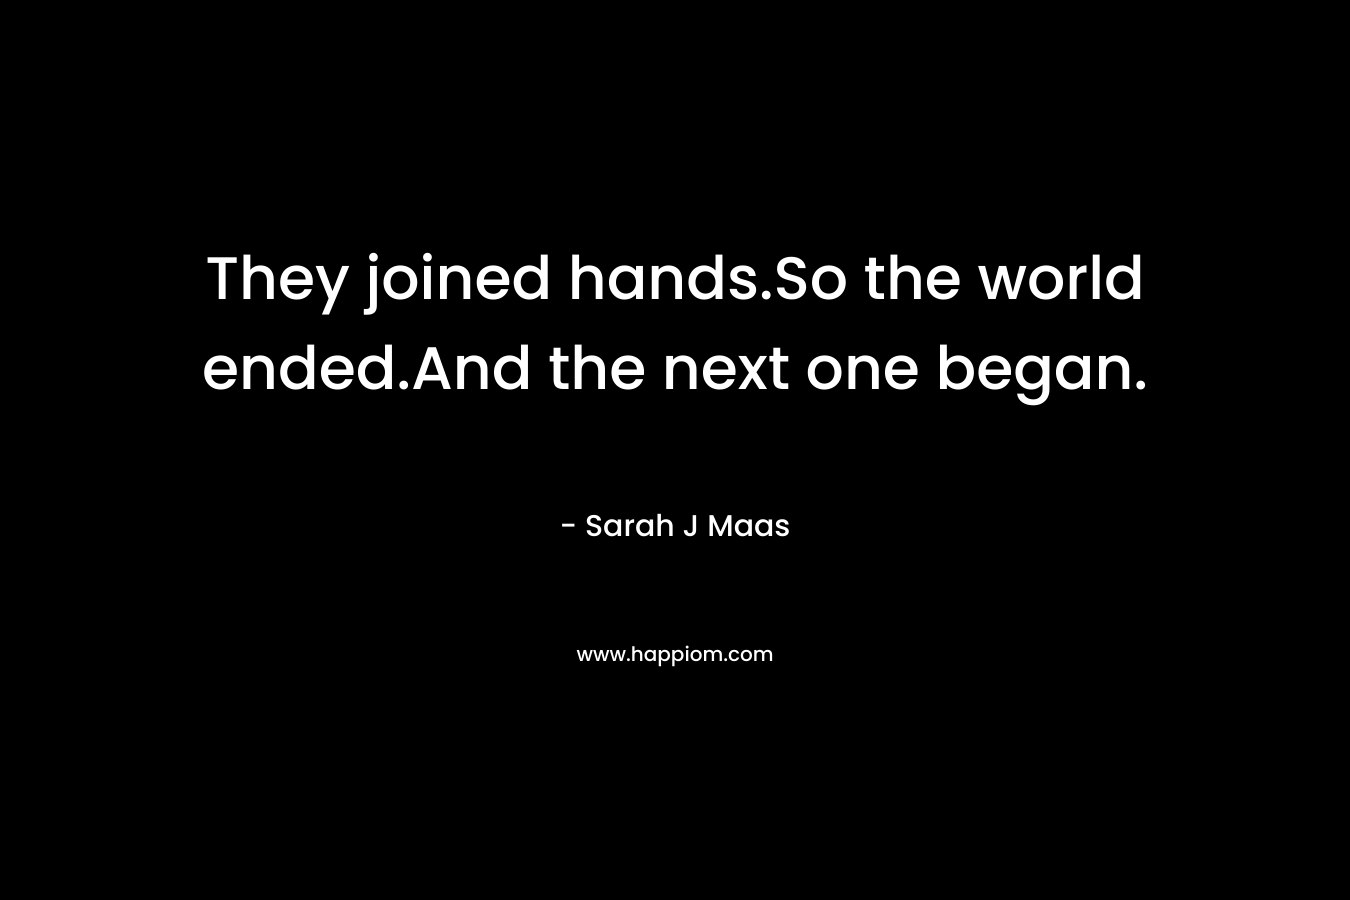 They joined hands.So the world ended.And the next one began.